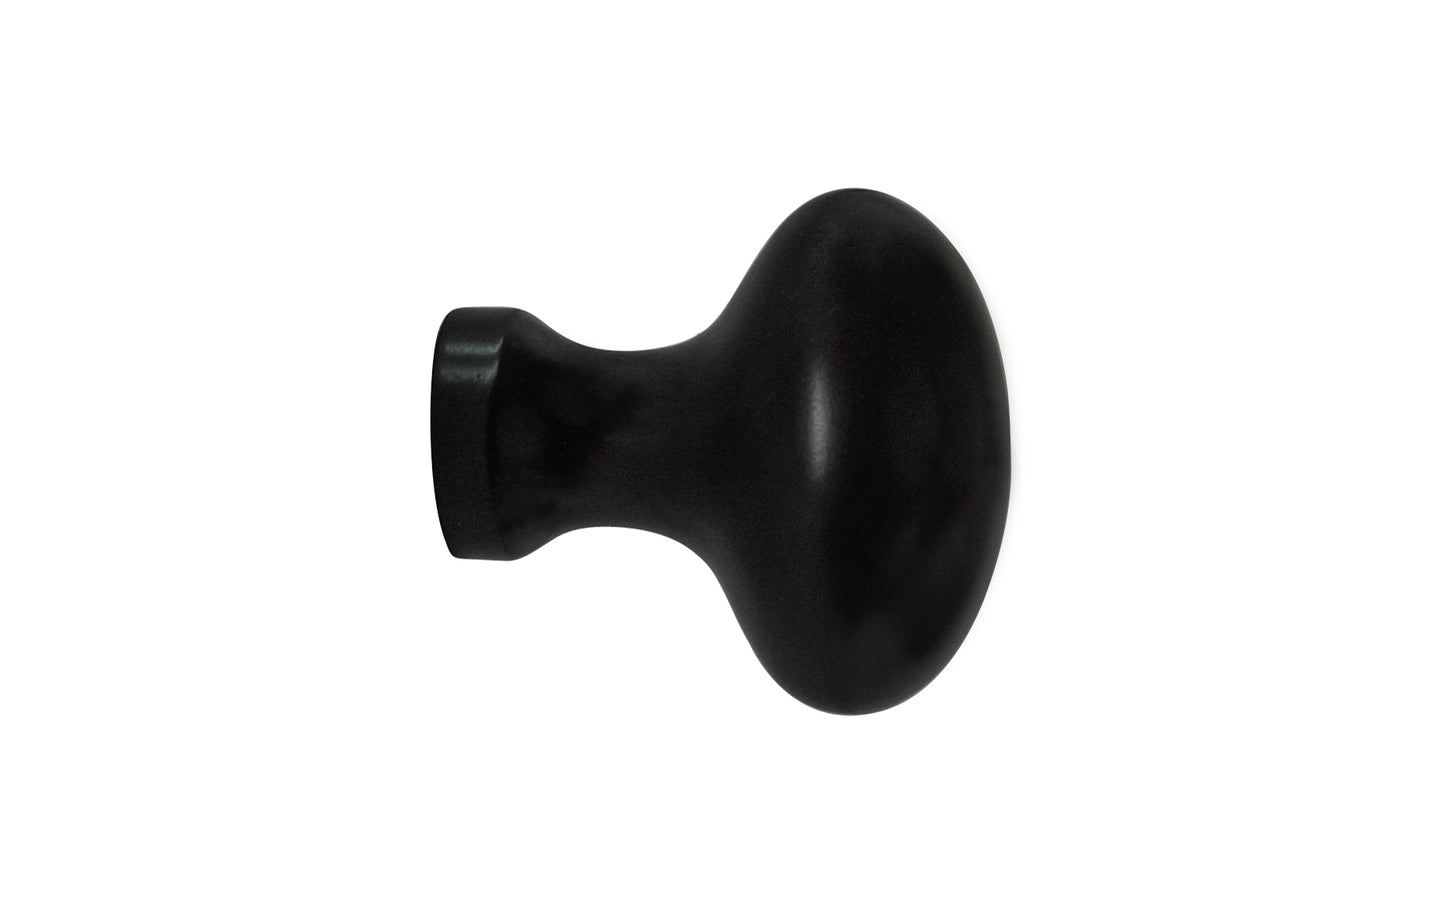 Vintage-style Hardware · Classic & Traditional Solid Brass Cabinet Oval Knob. 1-1/4" length size knob. Quality solid brass core, this stylish knob has a smooth & weighty fee. May be mounted vertically or horizontally. Great for kitchens, bathrooms, on furniture, cabinets, drawers, small doors, cabinet doors. Flat Black Finish.